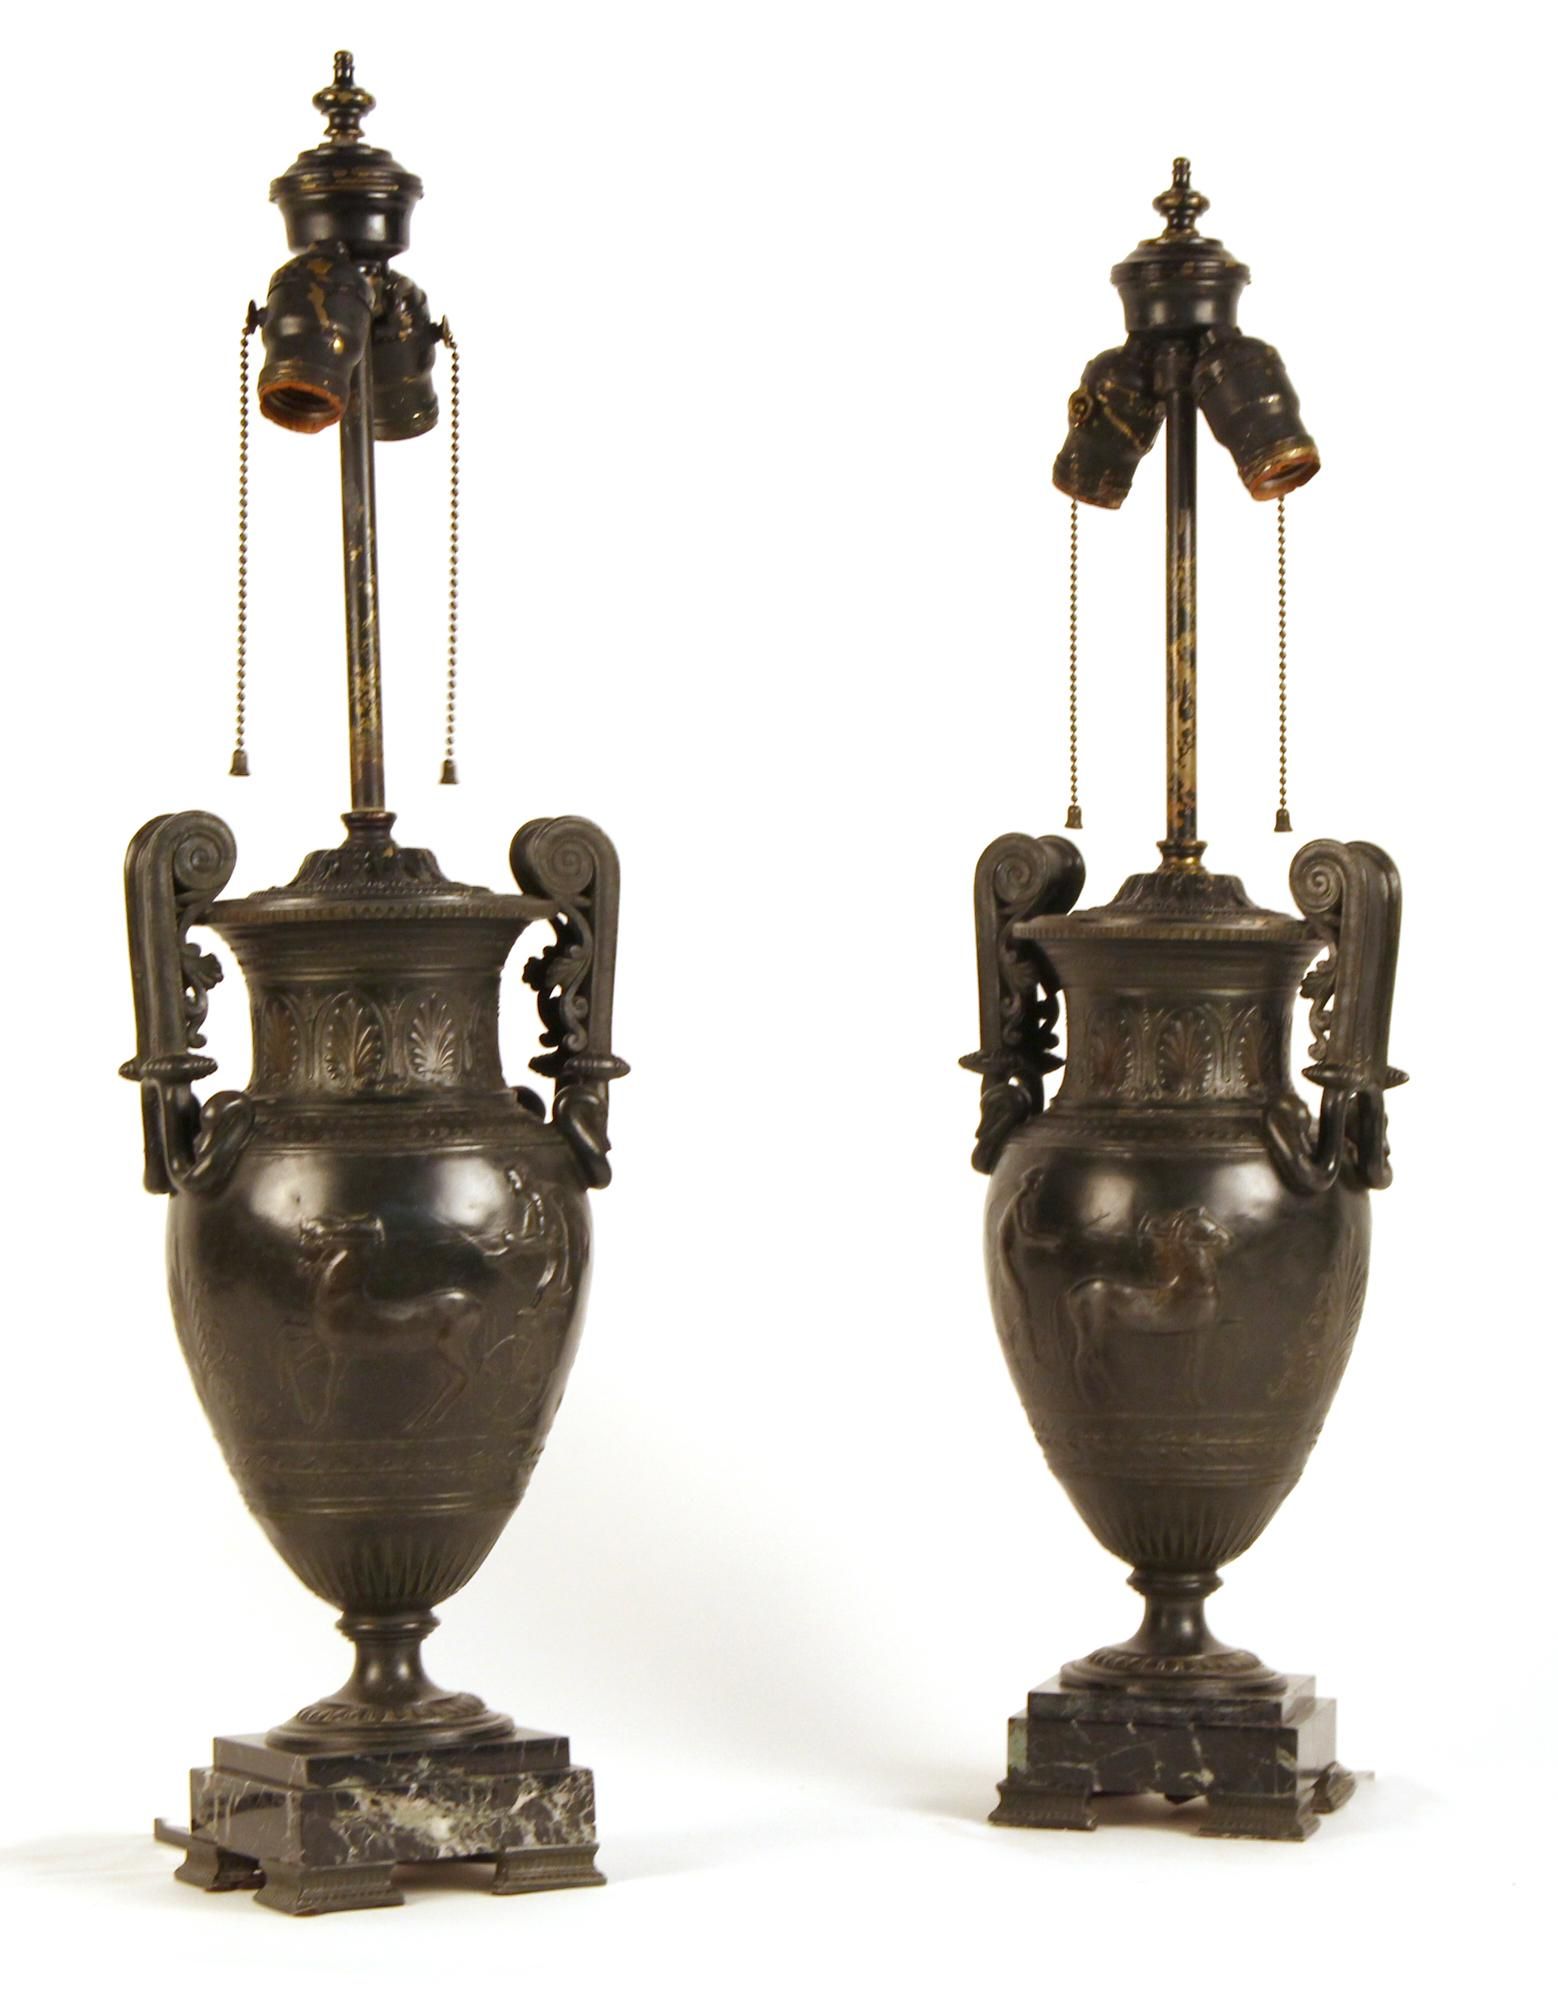 PAIR OF NEOCLASSICAL STYLE METAL 2fb2a5c